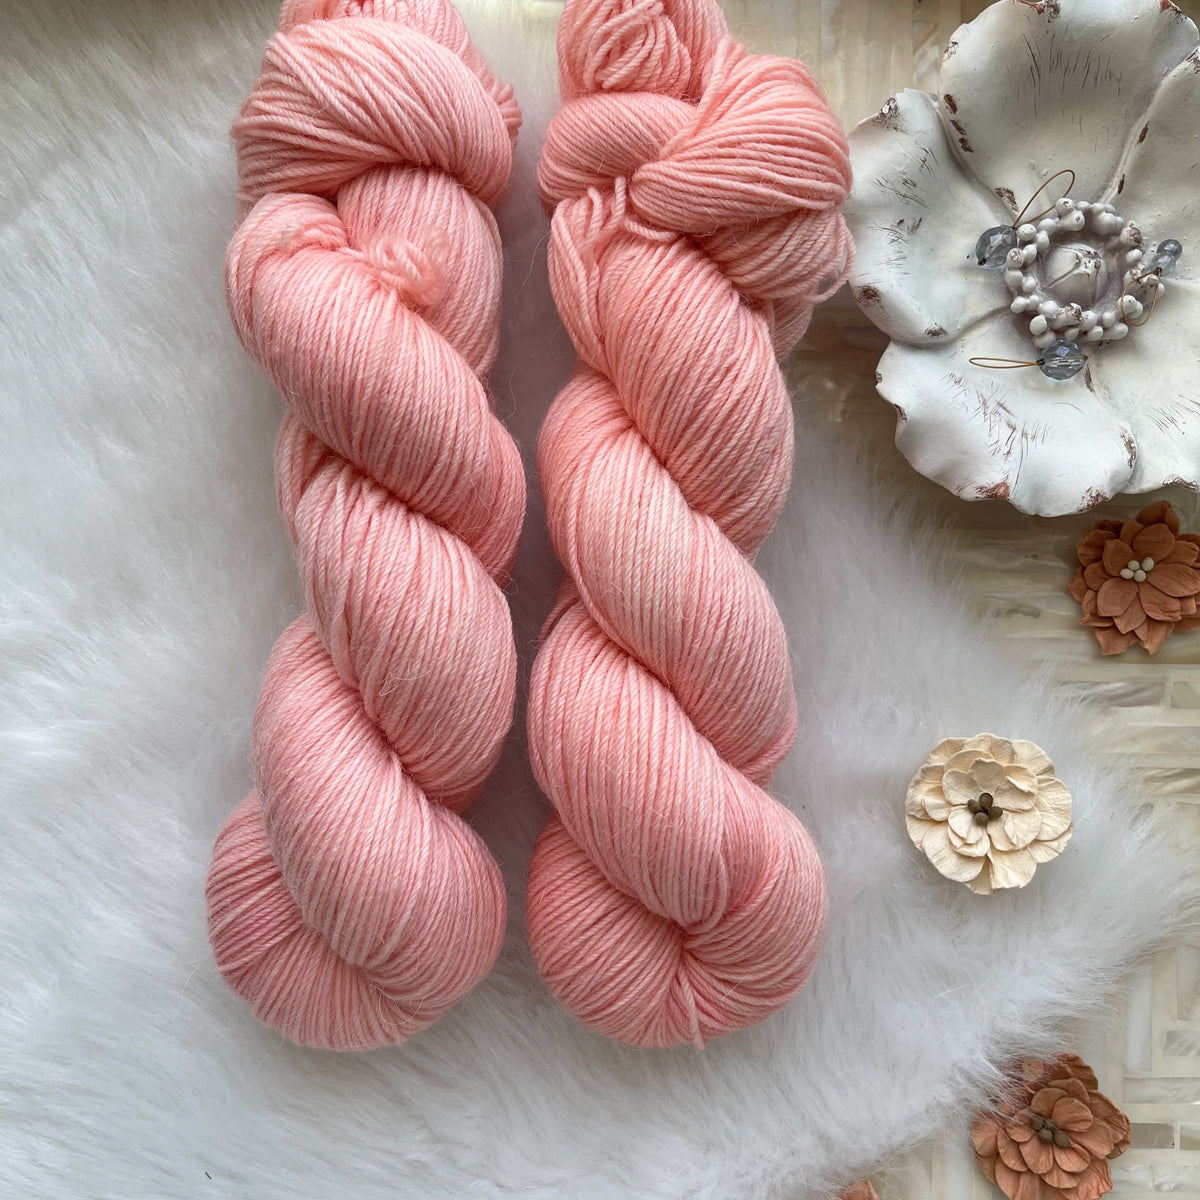 PETAL - Dyed to Order - Dreamy Base Handdyed Yarn